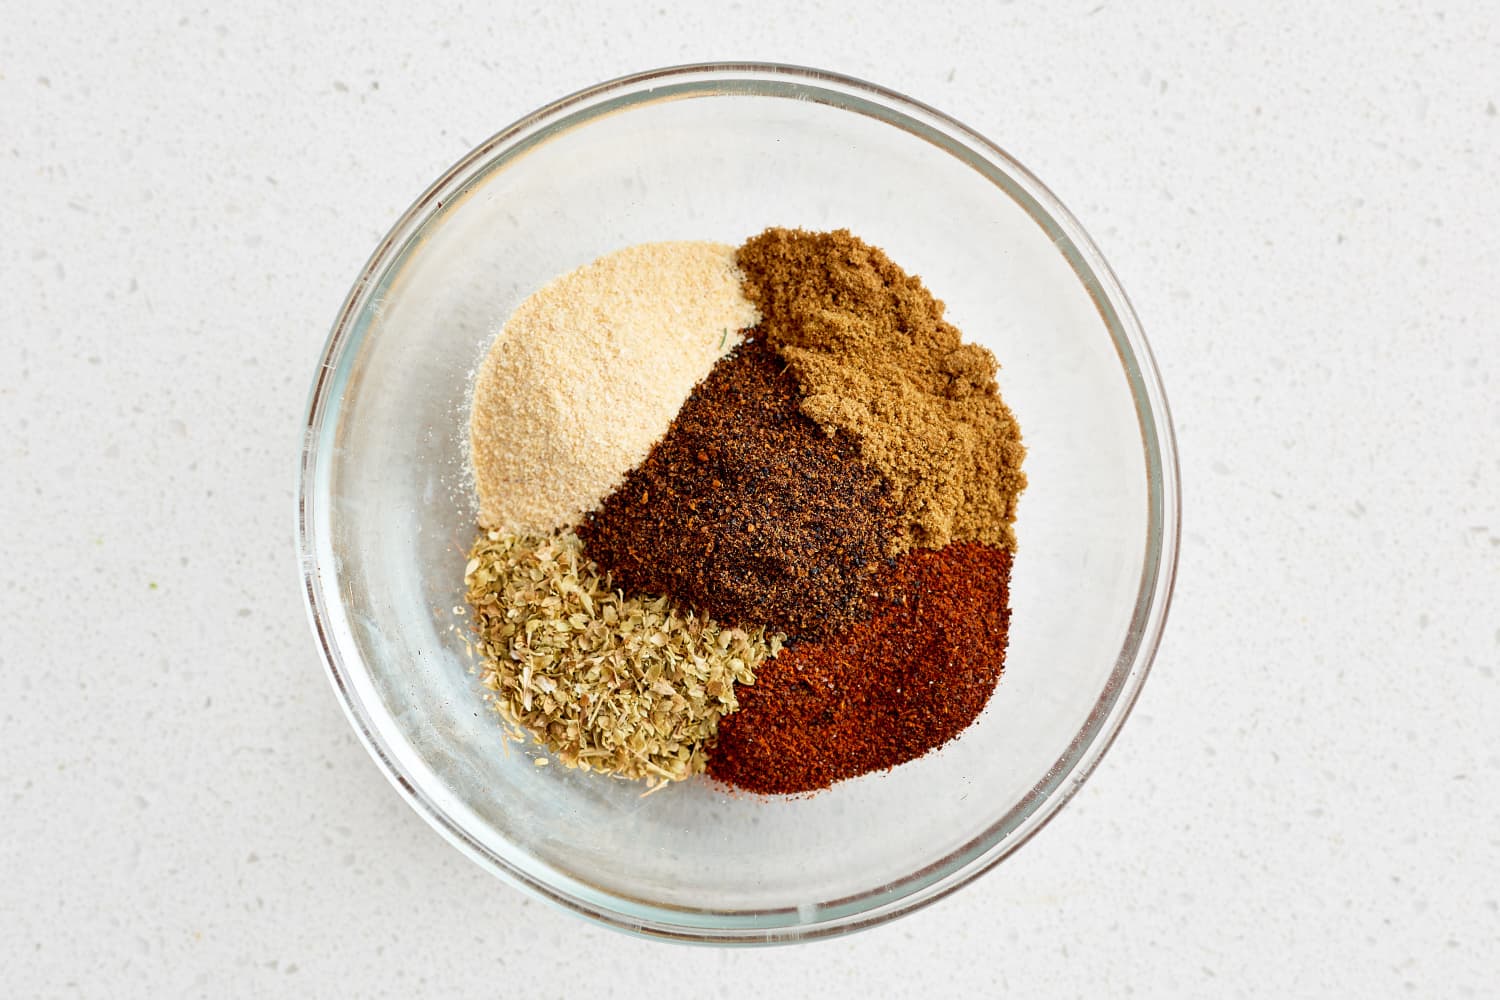 These Are the Best Chili Powder Substitutes to Use When You’re Running Low